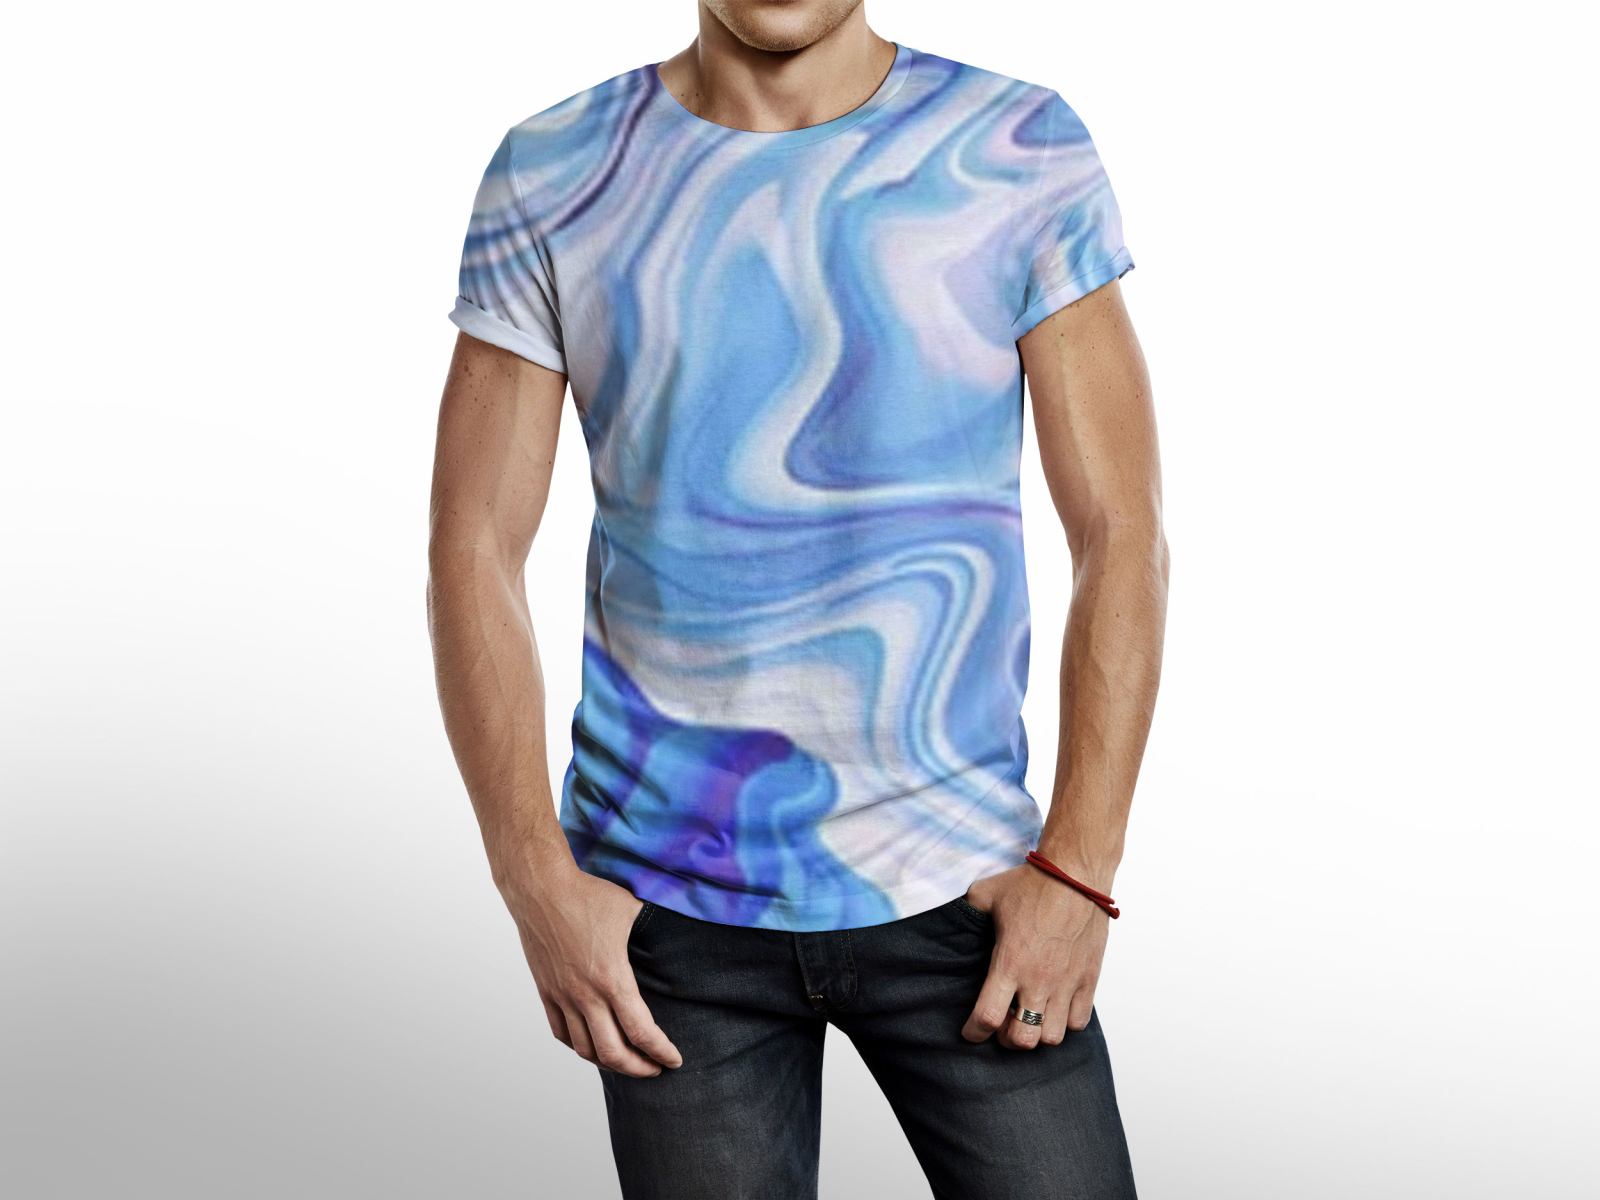 Marble Texture Background T shirt Design Template by Design Store on ...